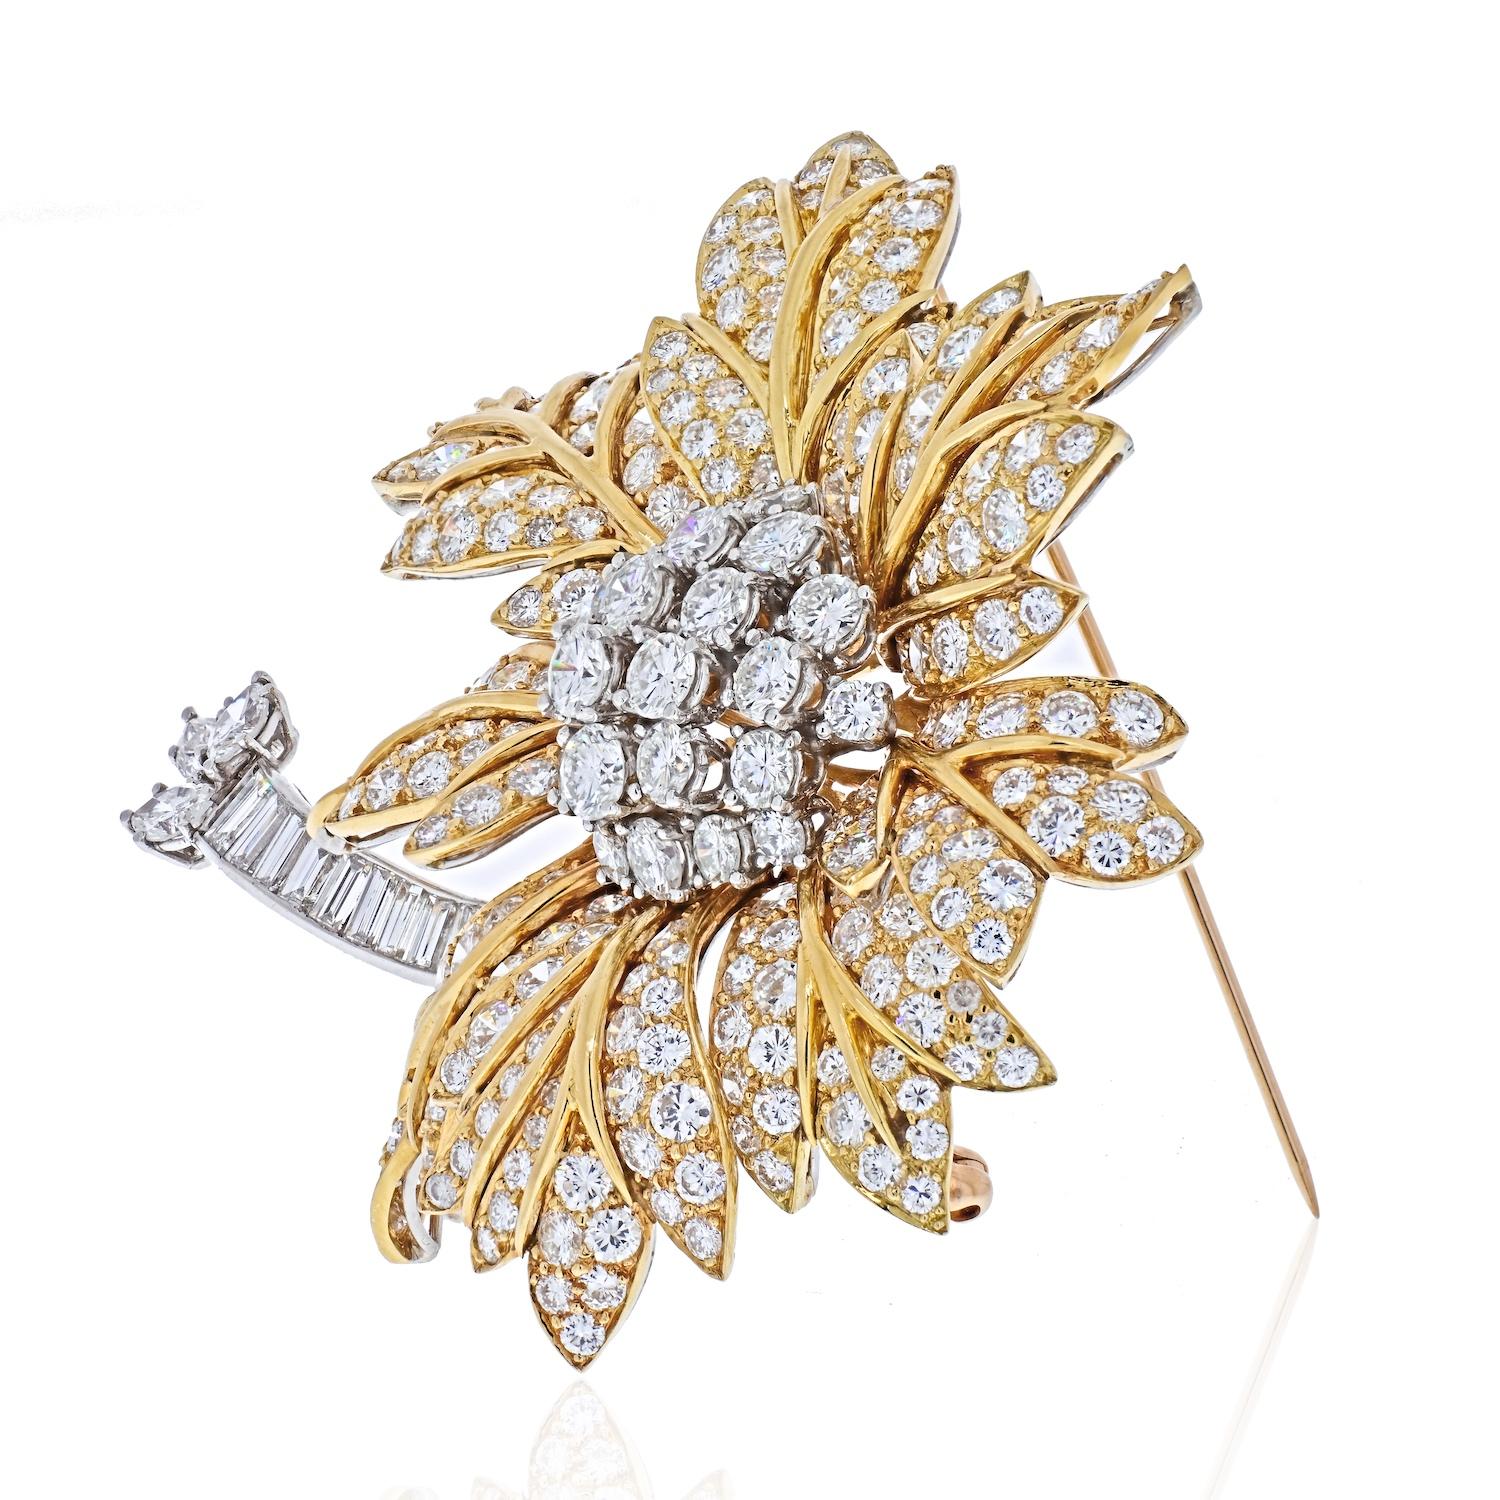 This is a Diamond Vintage Brooch, meticulously crafted in platinum and 18k yellow gold and adorned with an array of dazzling full-cut diamonds. This brooch exudes timeless sophistication with its classic design, featuring a captivating combination